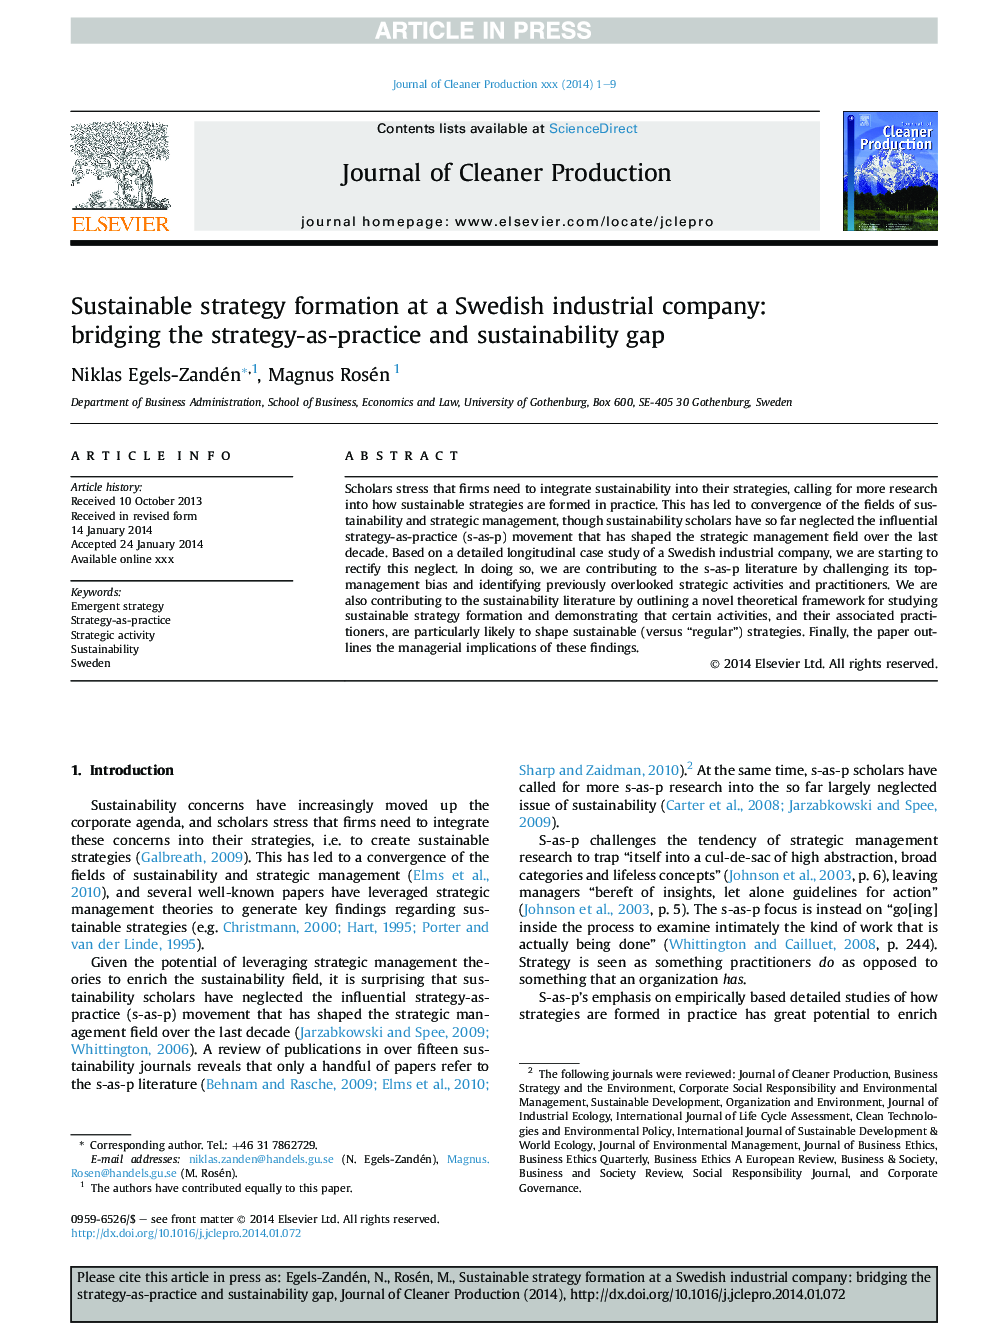 Sustainable strategy formation at a Swedish industrial company: bridging the strategy-as-practice and sustainability gap